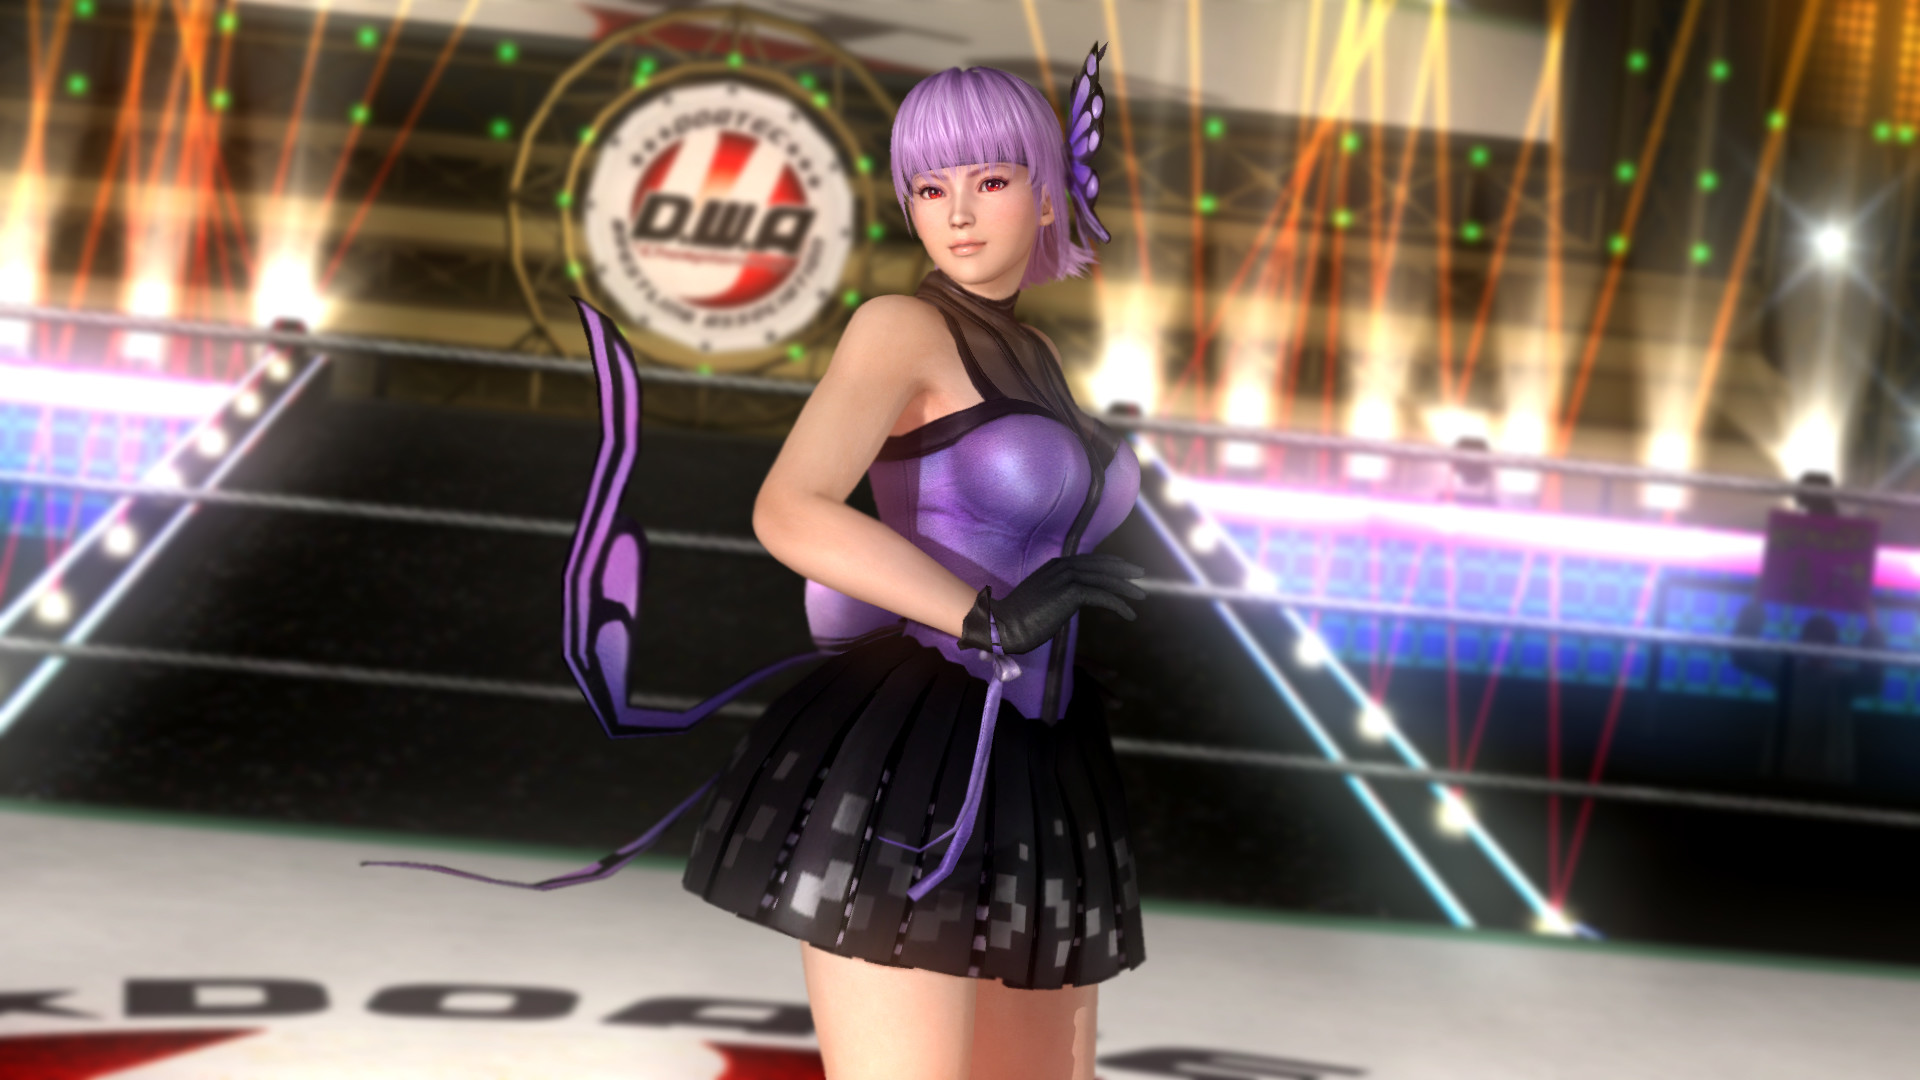 1920x1080 Ayane images Dead or Alive 5 | Ayane HD wallpaper and background photos